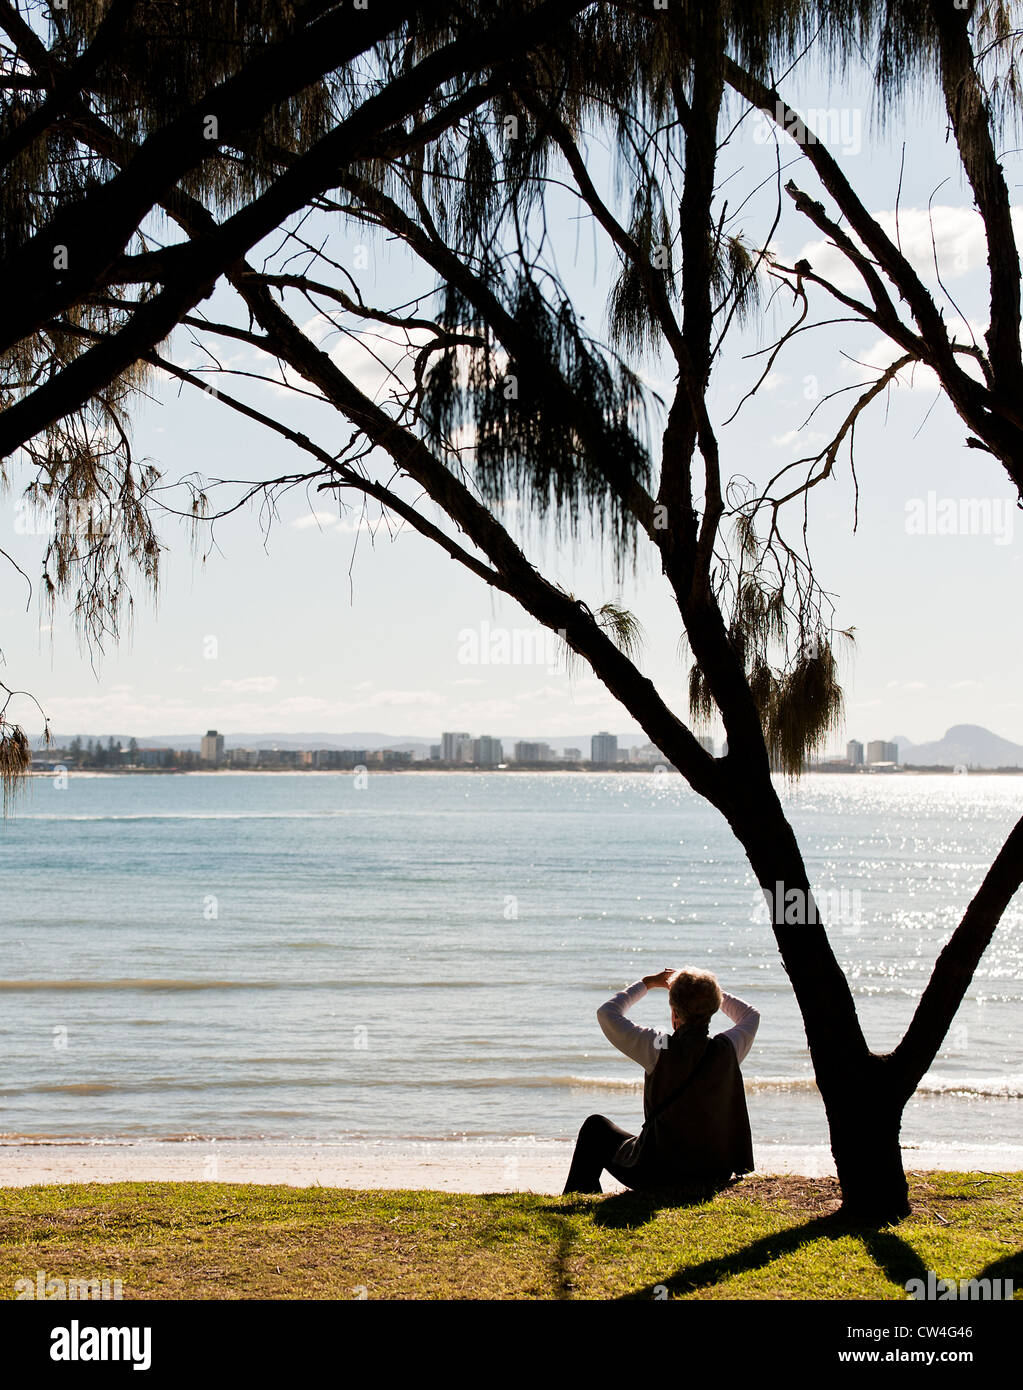 A man sitting in the shade of a tree on Mooloolaba Beach on the Sunshine Coast in Queensland Australia Stock Photo